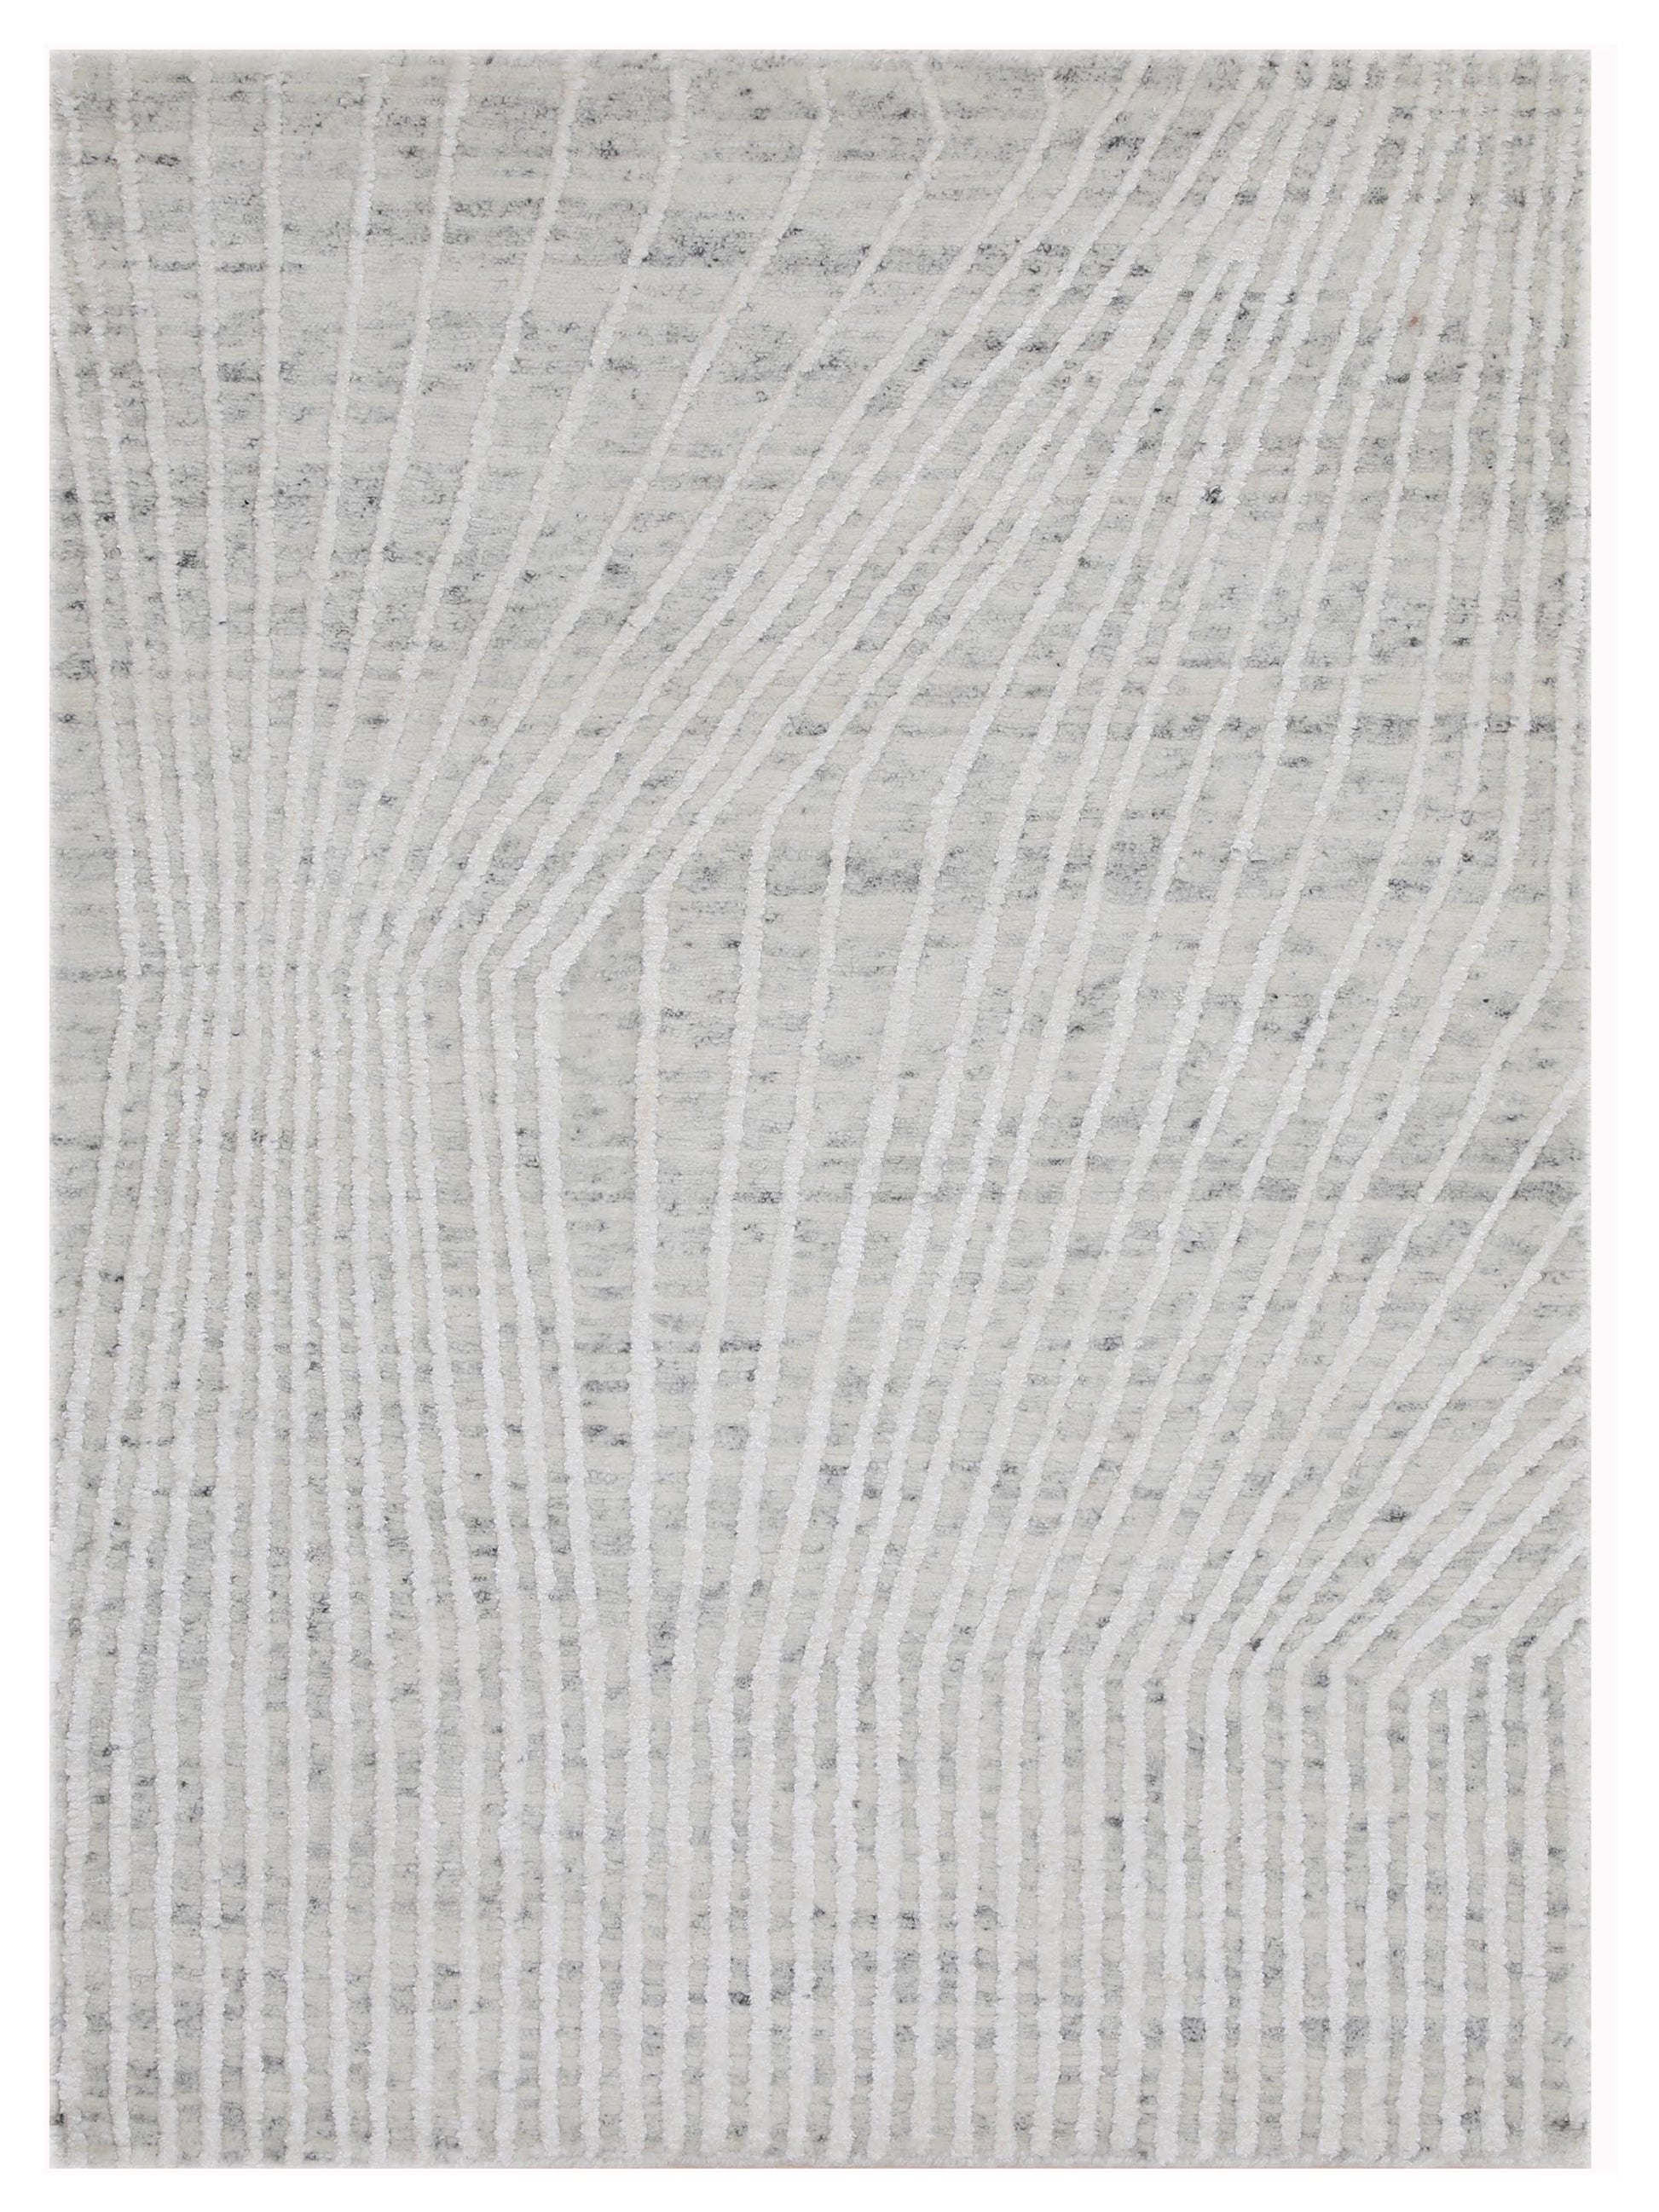 Artisan Mary MN-273 Ivory Contemporary Knotted Rug